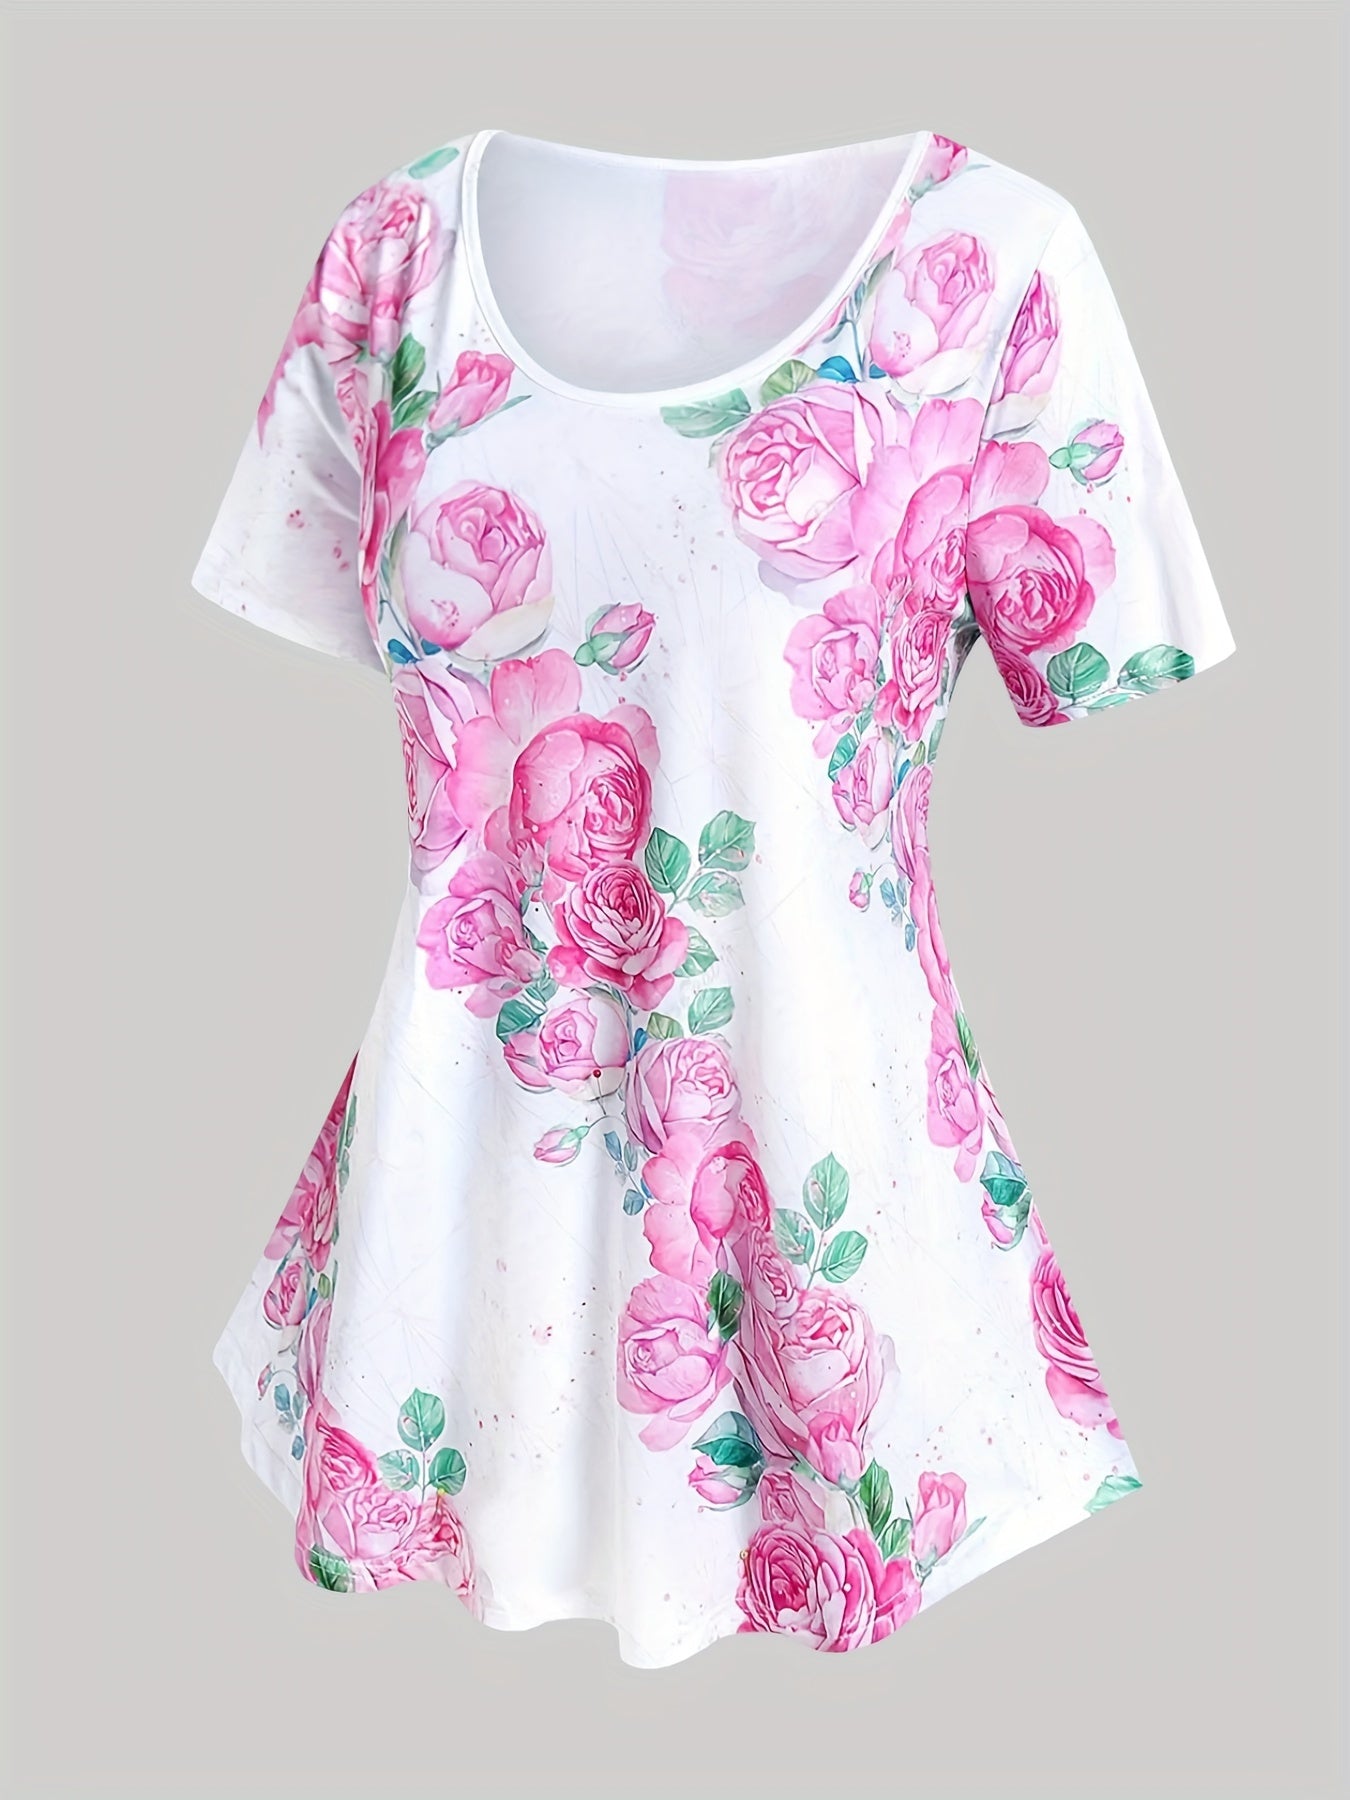 "Floral Print Casual Two-piece Set: Short Sleeve Top & Elastic Waist Pants for Women's Clothing"